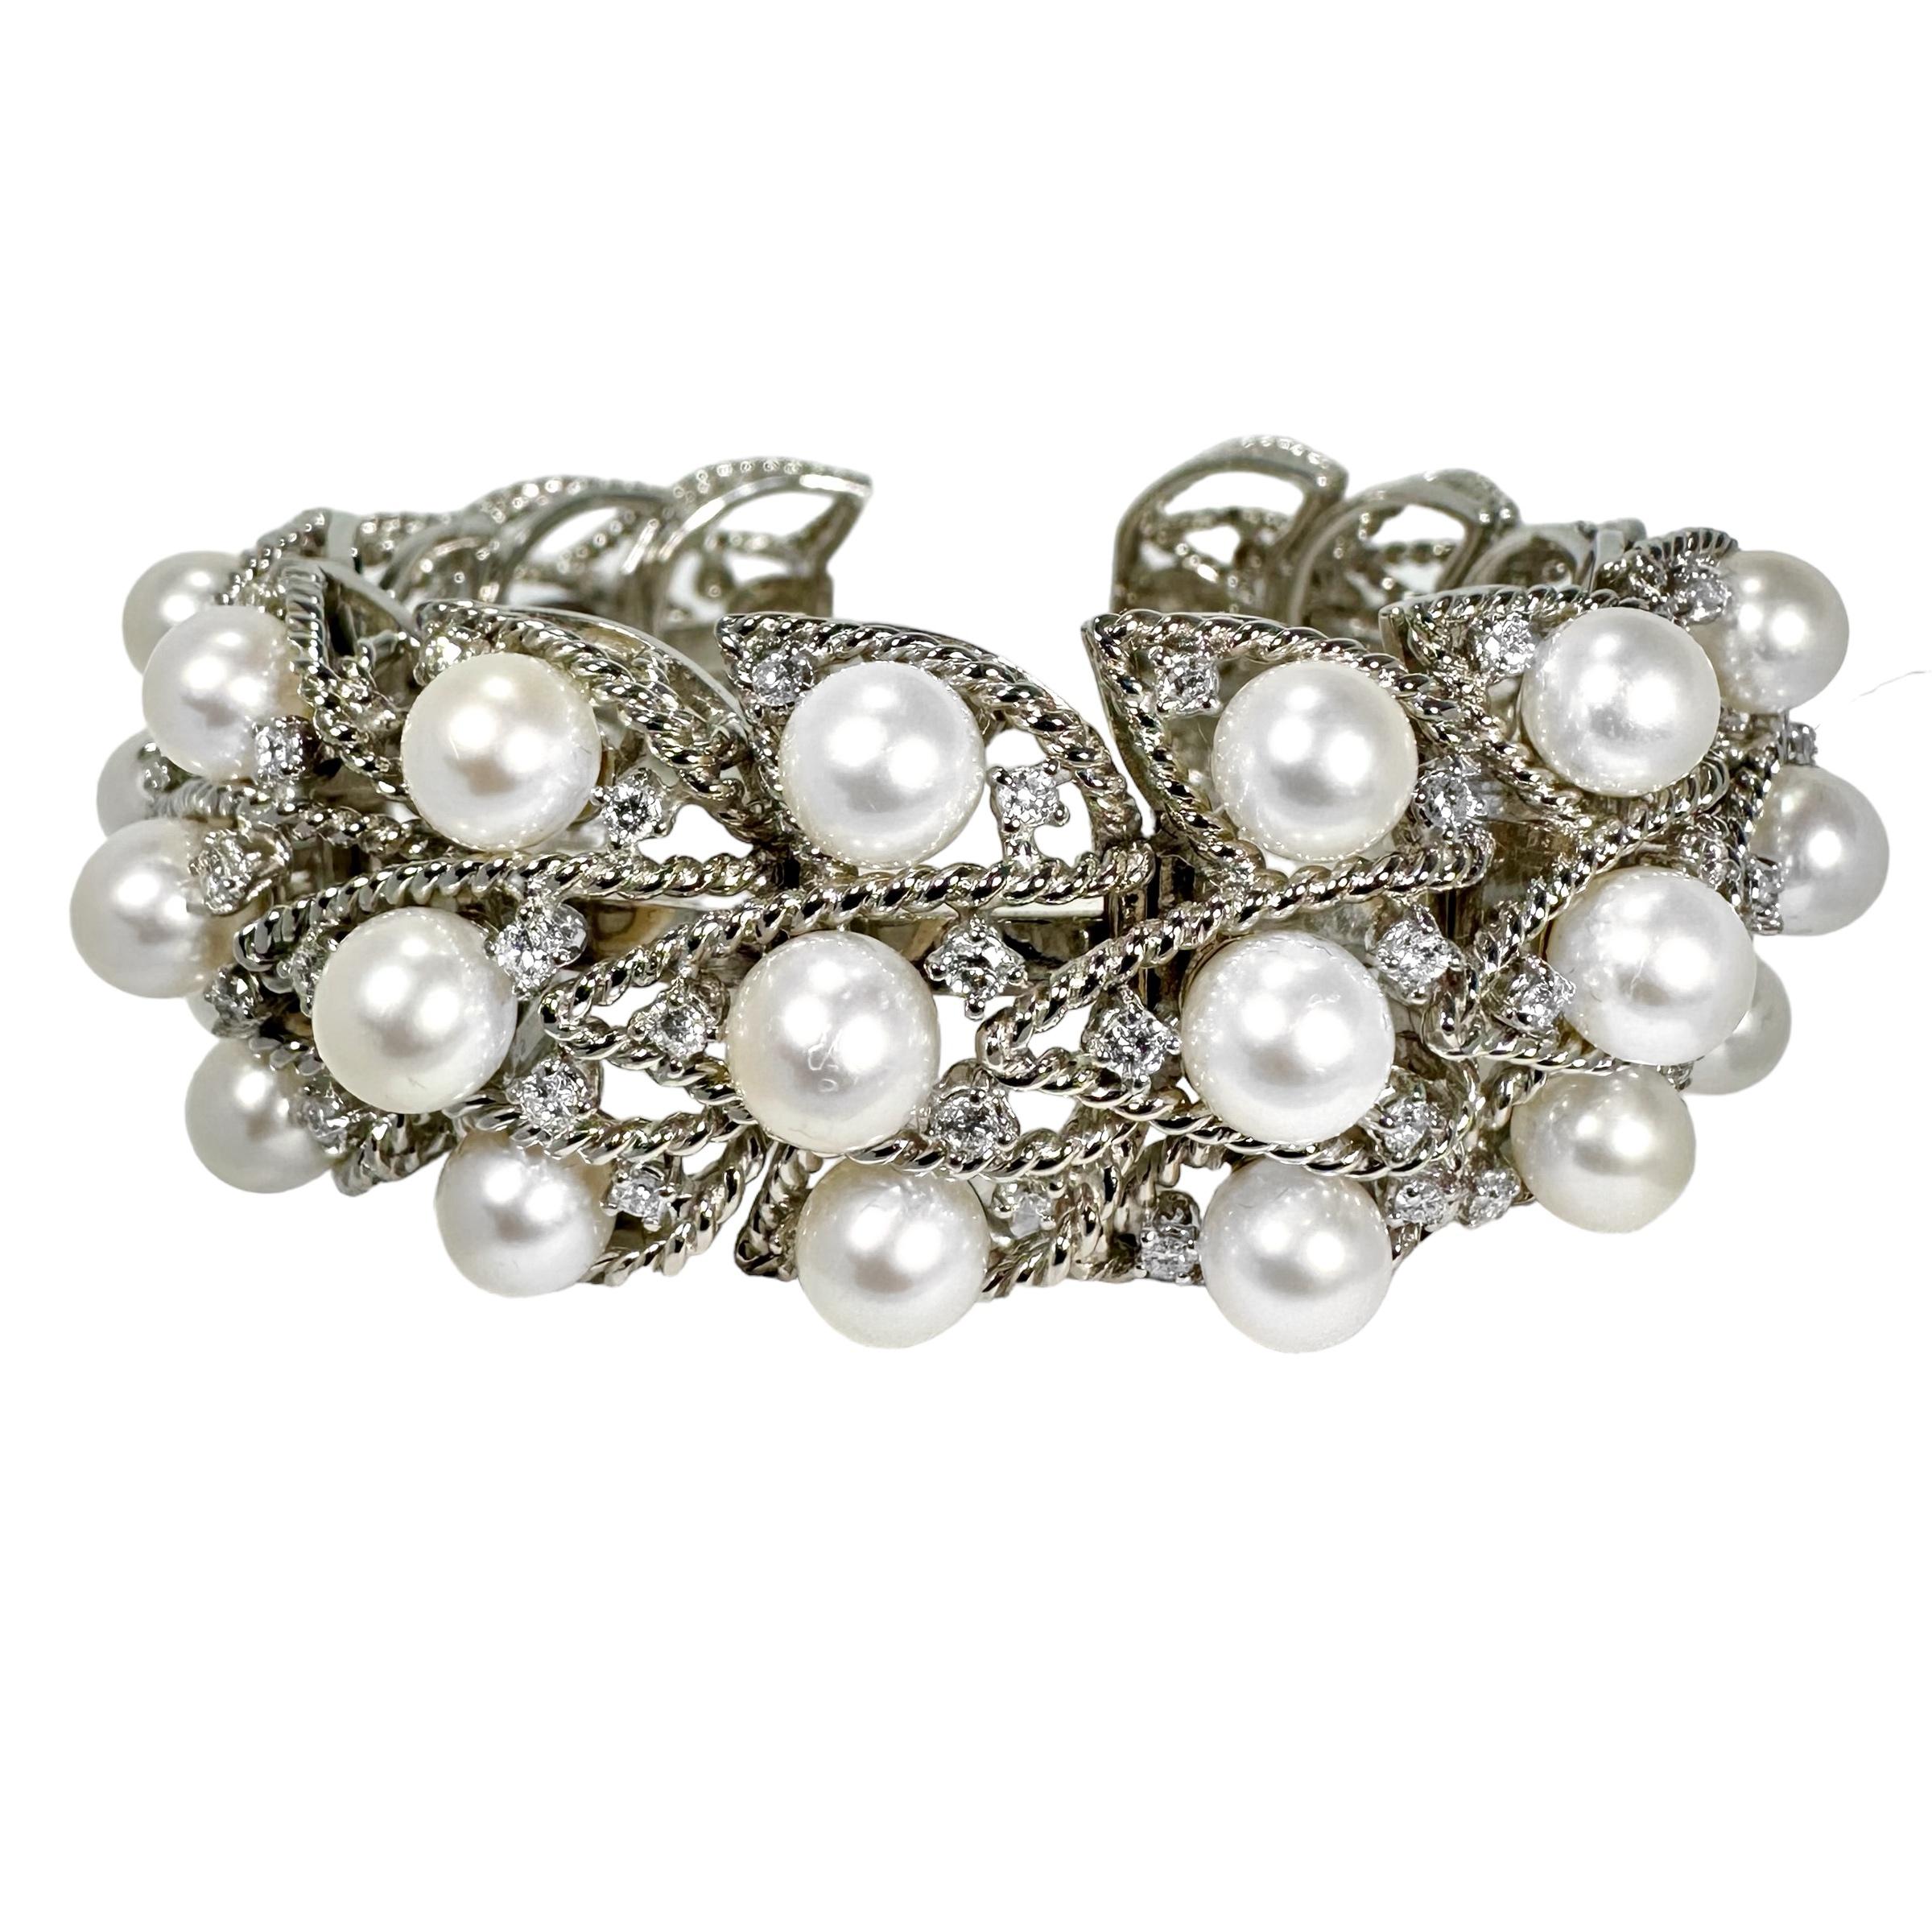 This lovely flexible, pearl and diamond cuff by Seaman Schepps is as elegant as it is comfortable to wear. The nature of the flexible links, with the open back design, allow for a range of wrist sizes to fit, from a medium to a large size. The